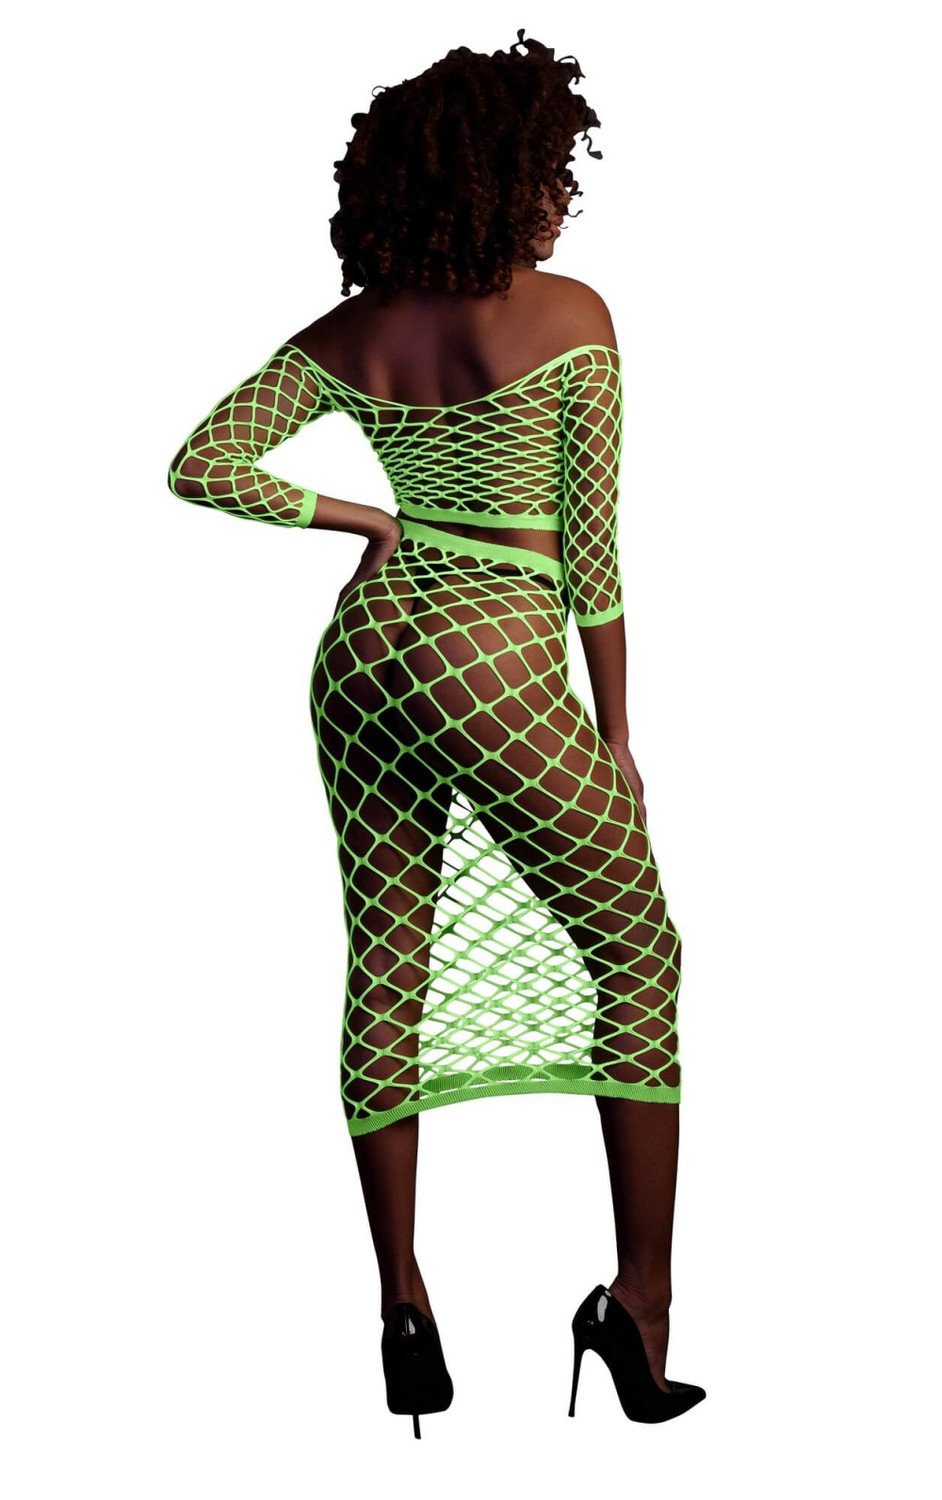 Ouch! - Glow in the Dark Mesh Skirt And Top (Lime)